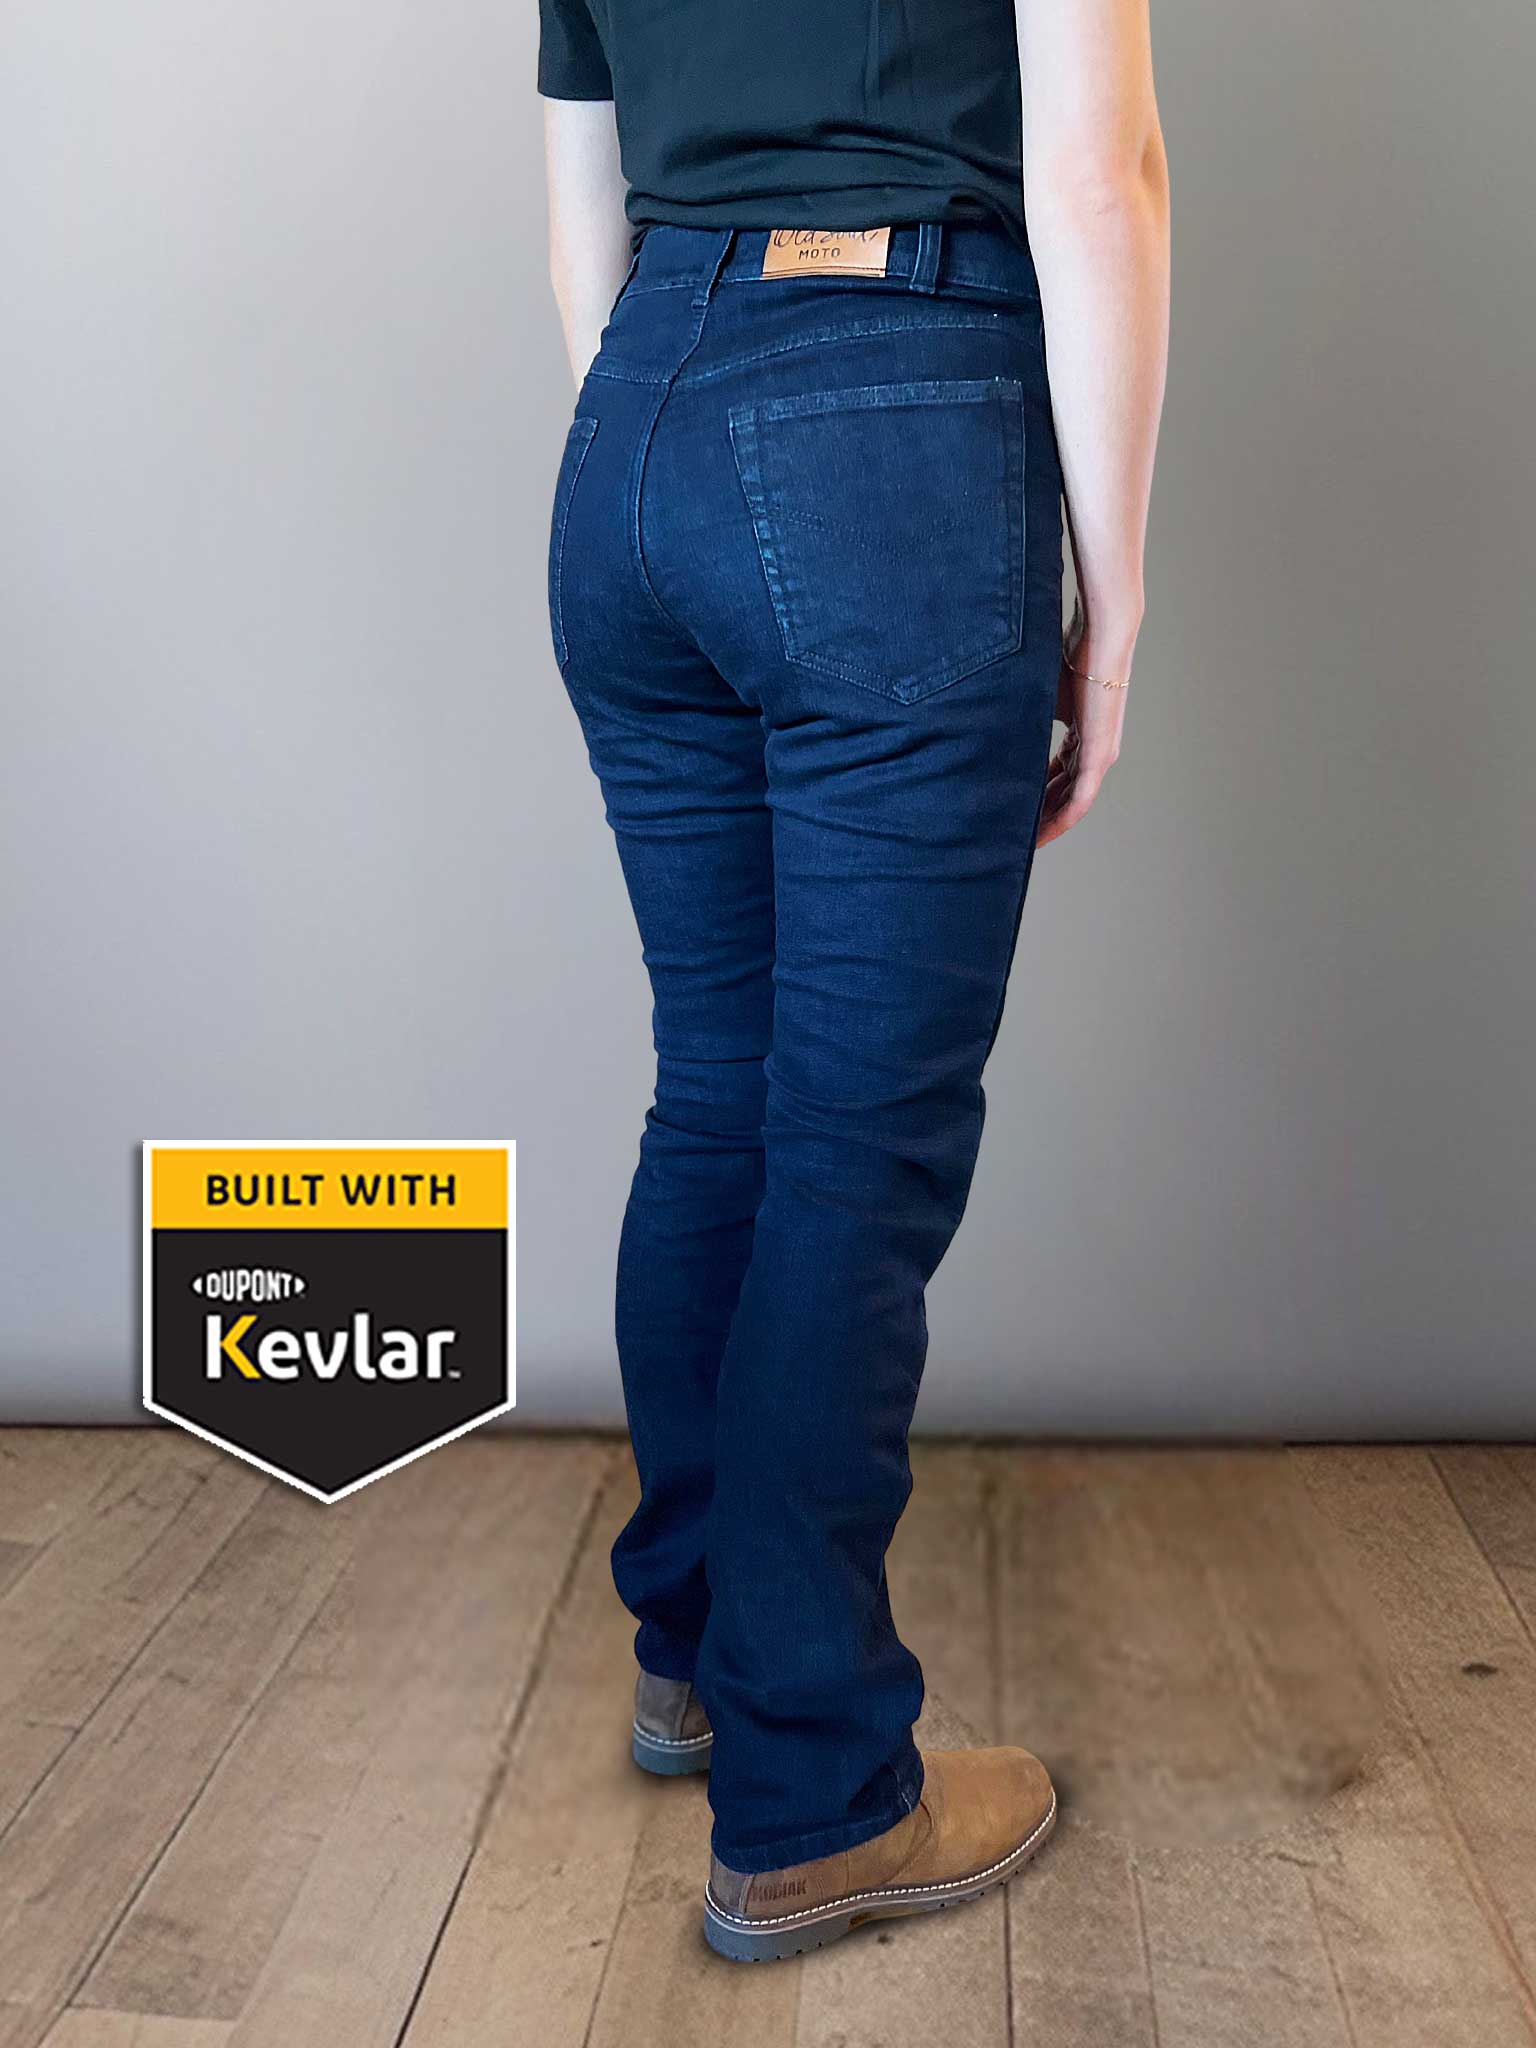 New Kevlar Women's Motorcycle Jeans Woman Moto Pants Protective